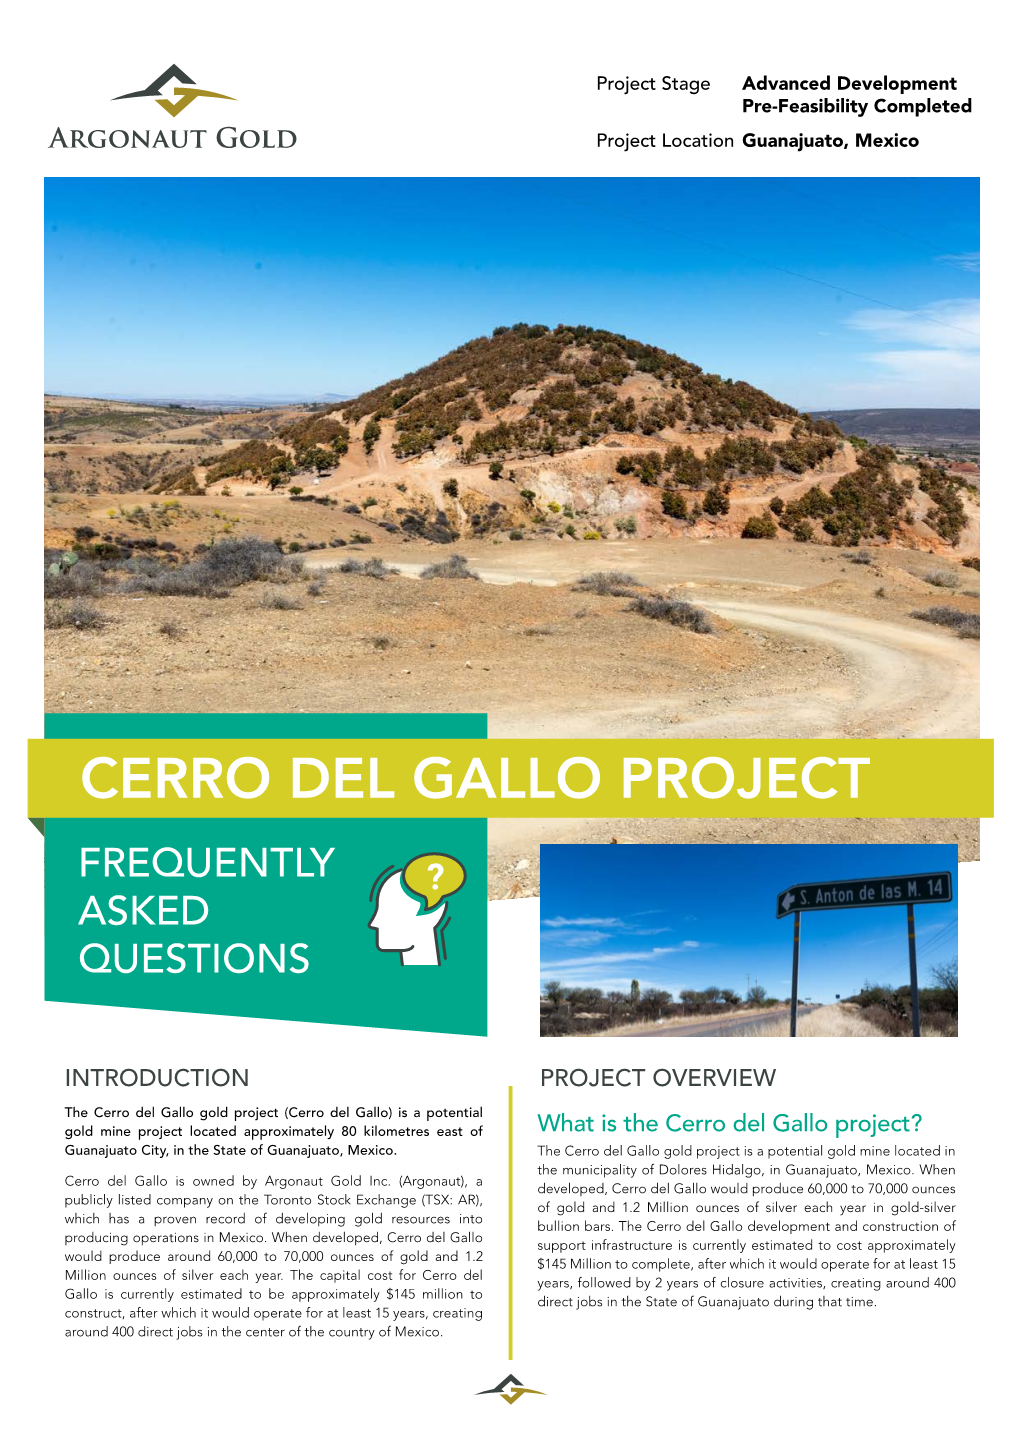 Cerro Del Gallo Project Frequently Asked Questions